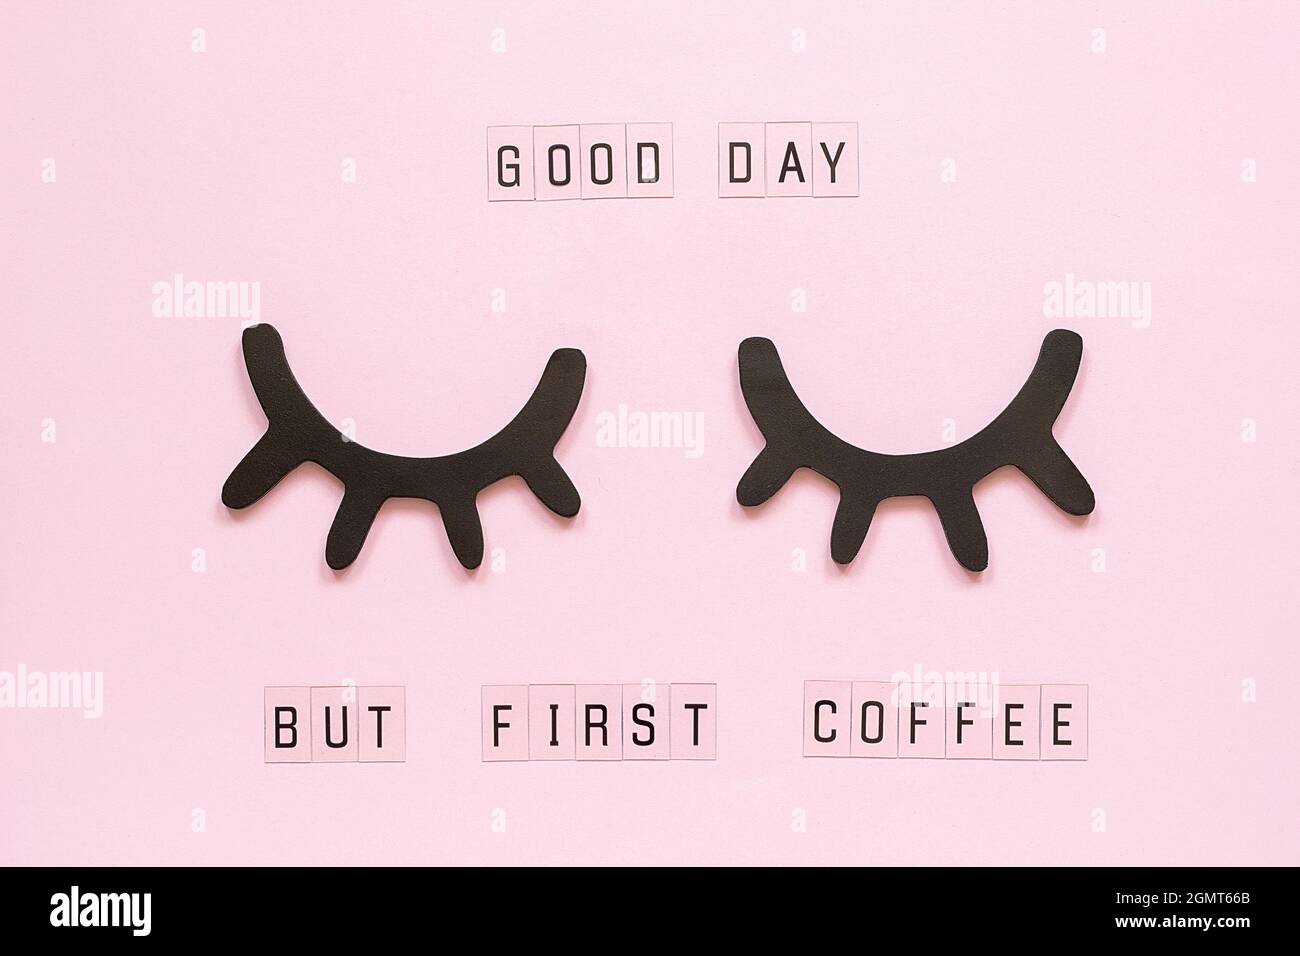 Text Good day, but first coffee and decorative wooden black eyelashes, closed eyes, on pastel pink paper background. Layout Top view Flat lay Concept Stock Photo